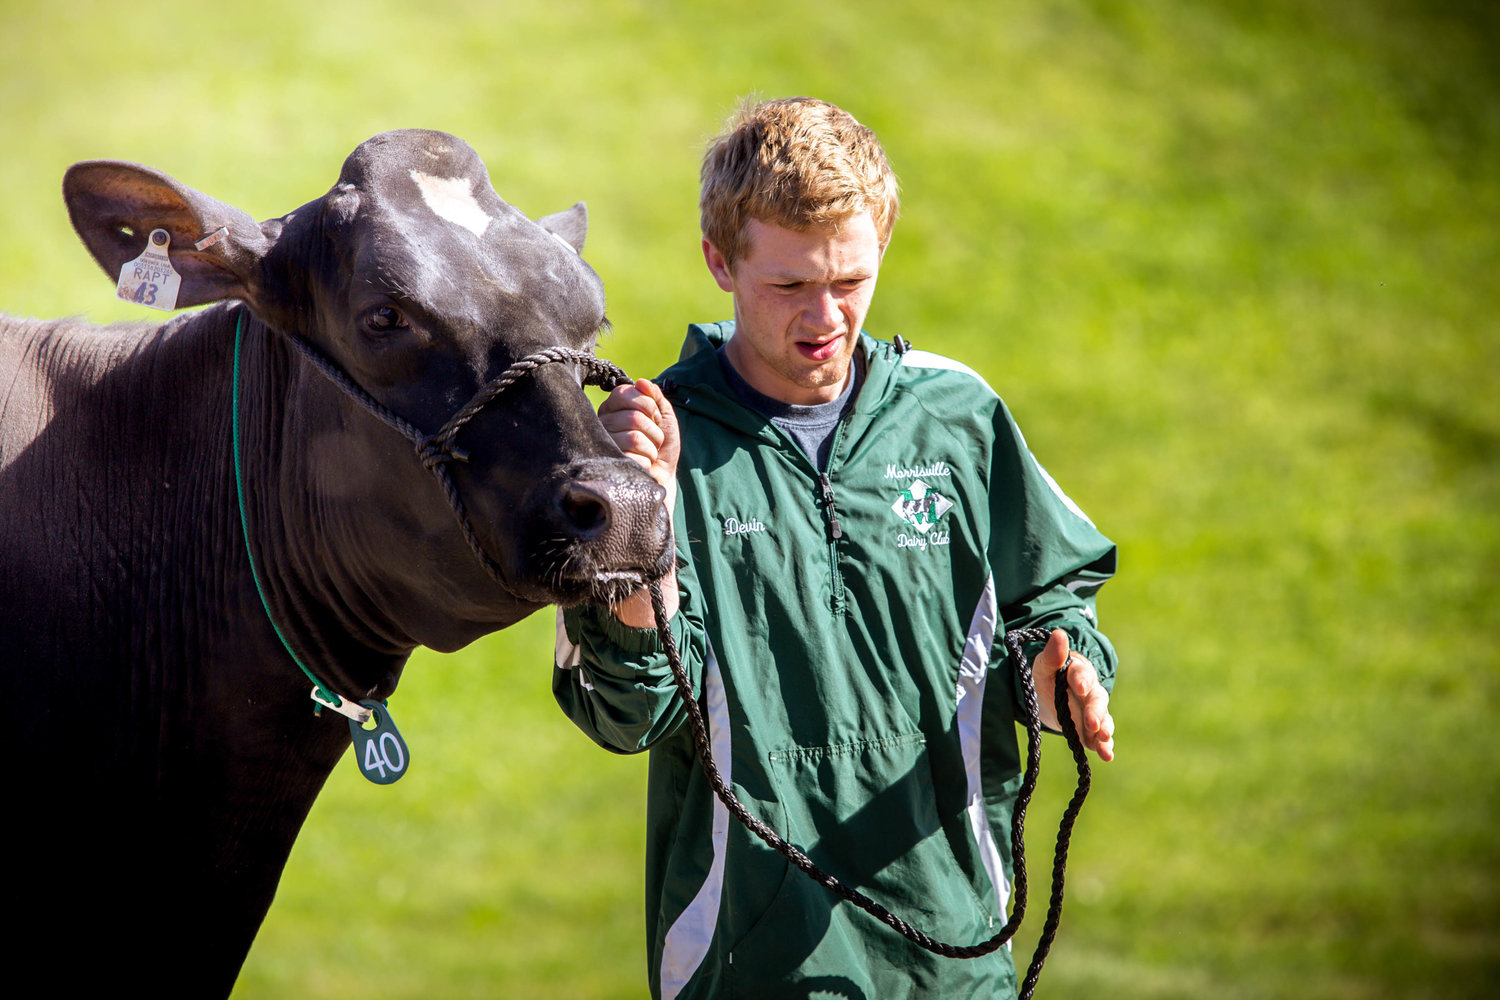 ON THE MOOVE? — SUNY Morrisville Dairy Club student Devin Kuhn leads a college cow in this  photo from the college. SUNY Morrisville’s will host its Spring on the Farm event from noon to 4 p.m. on Saturday, highlighting the many agricultural programs and opportunities at the college and providing general information on agriculture and related products. (Photo courtesy SUNY Morrisville)